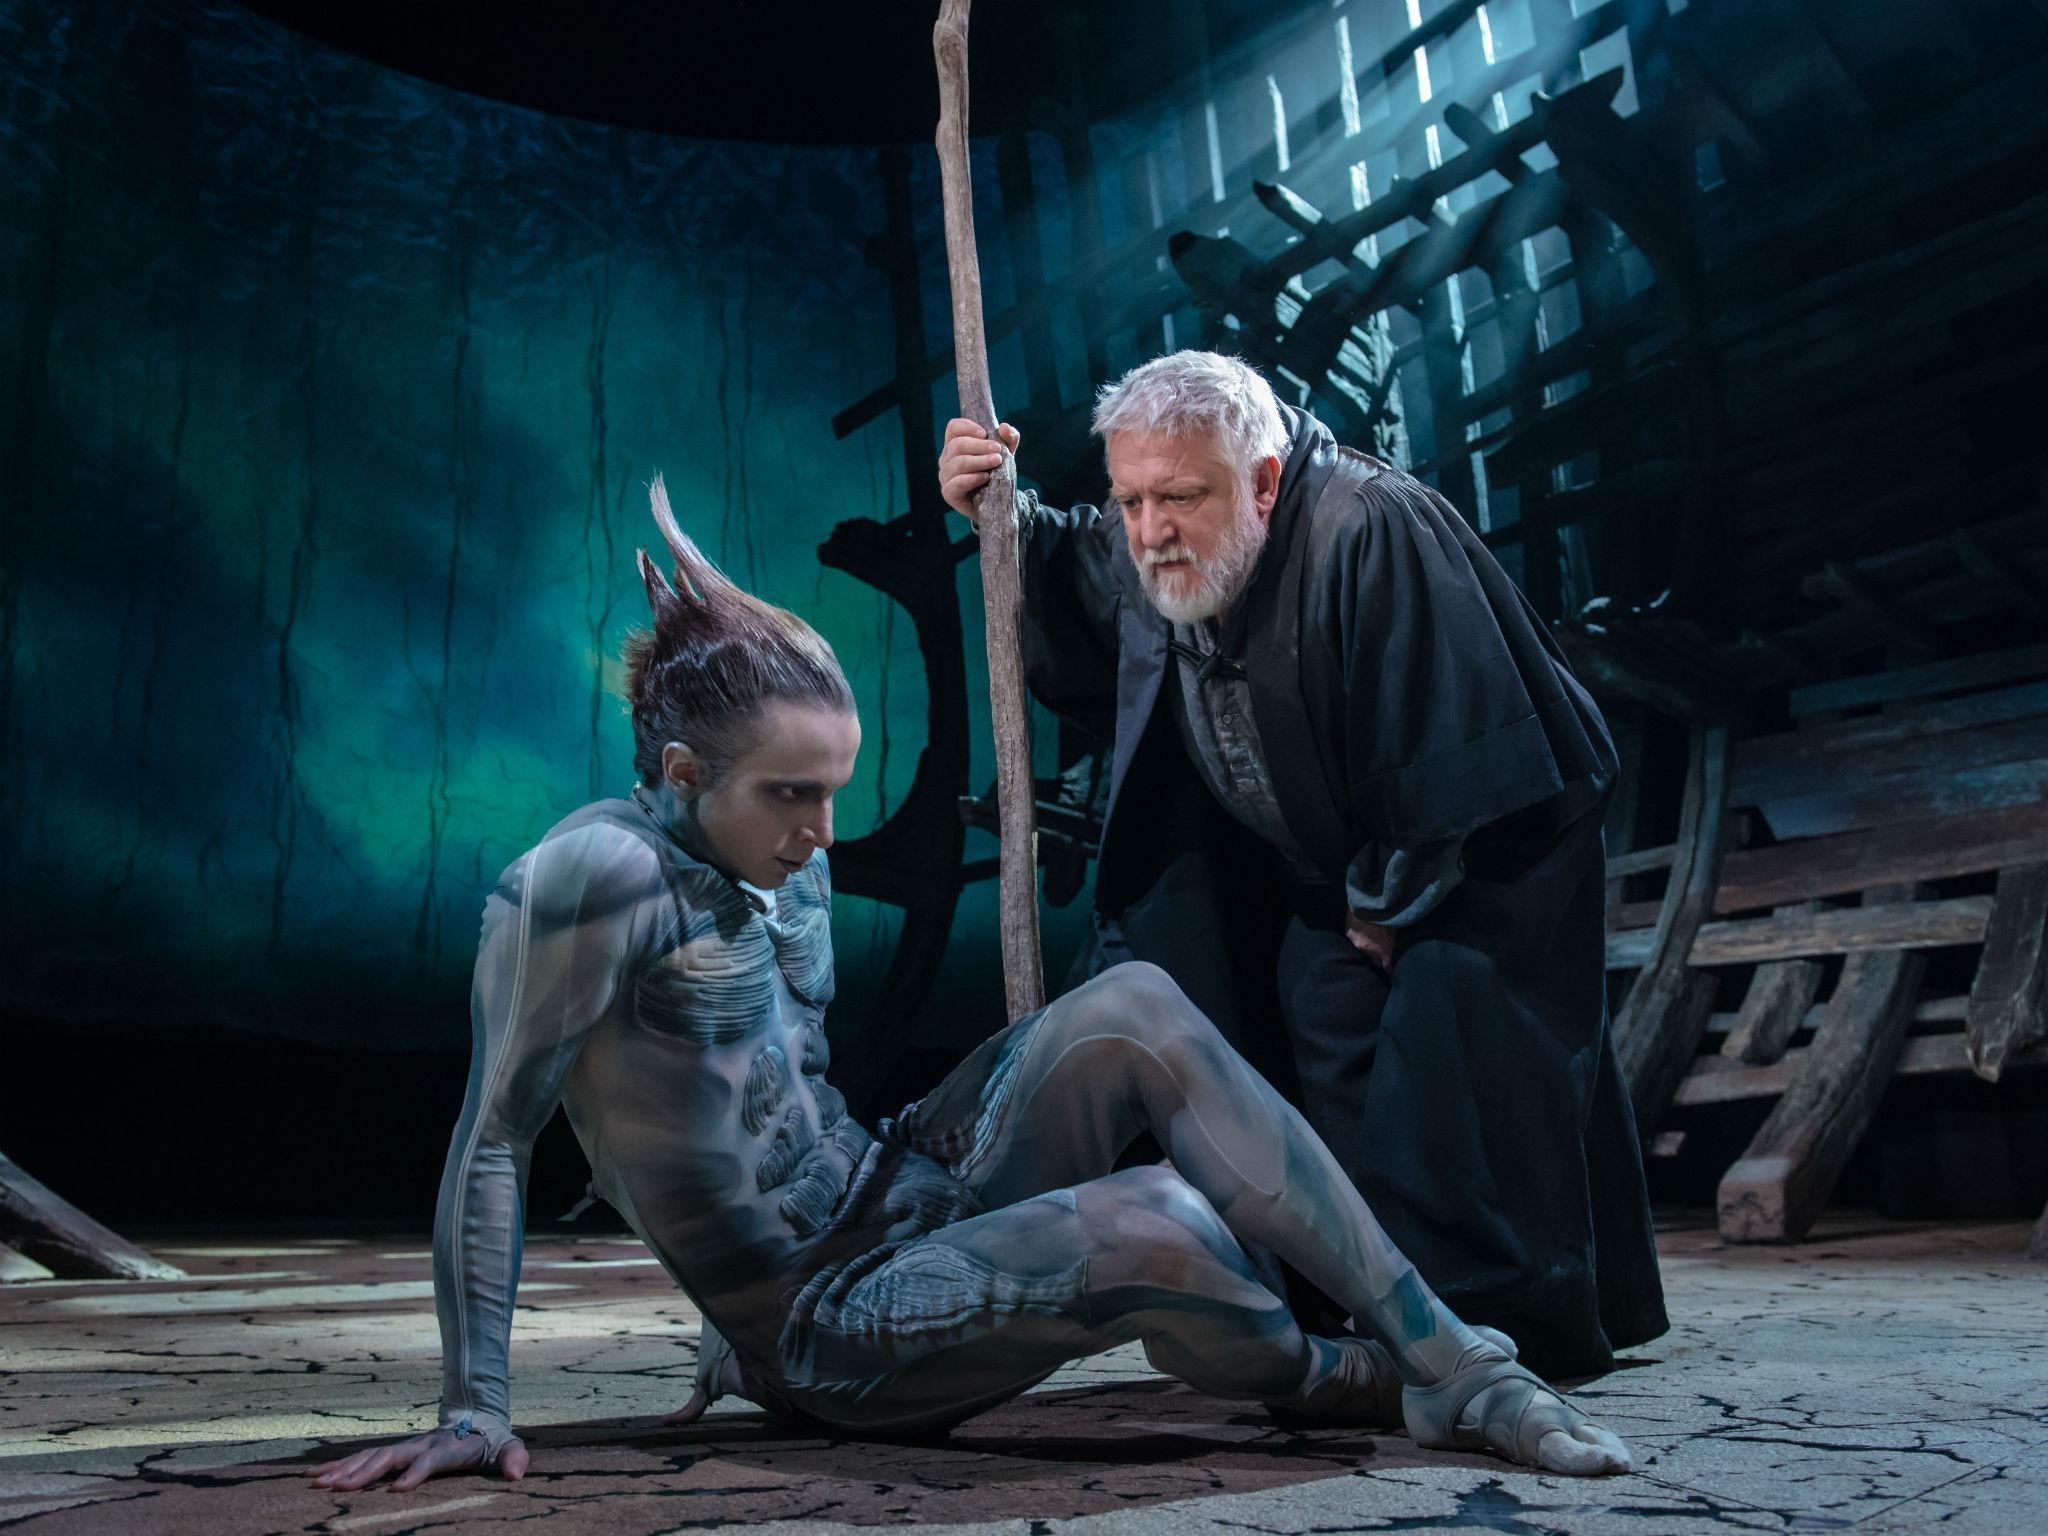 Mark Quartley (left) as Ariel and Simon Russell Beale (right) as Prospero in 'The Tempest' at the RSC